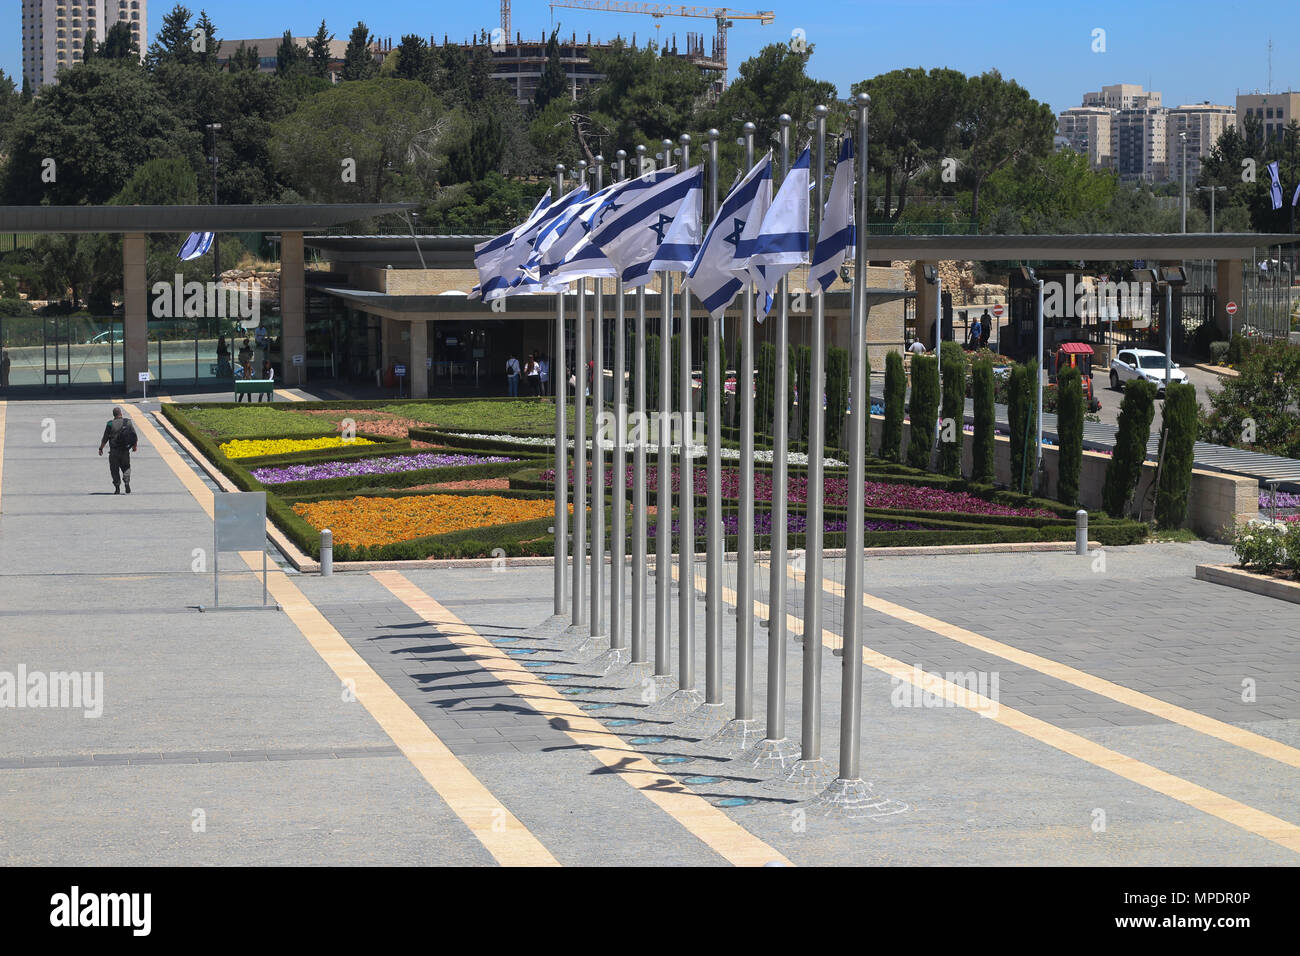 Jerusalem, Israel - 16 May 2018: View of the forecourt of the Knesset, the Israeli parliament building in Jerusalem. Stock Photo